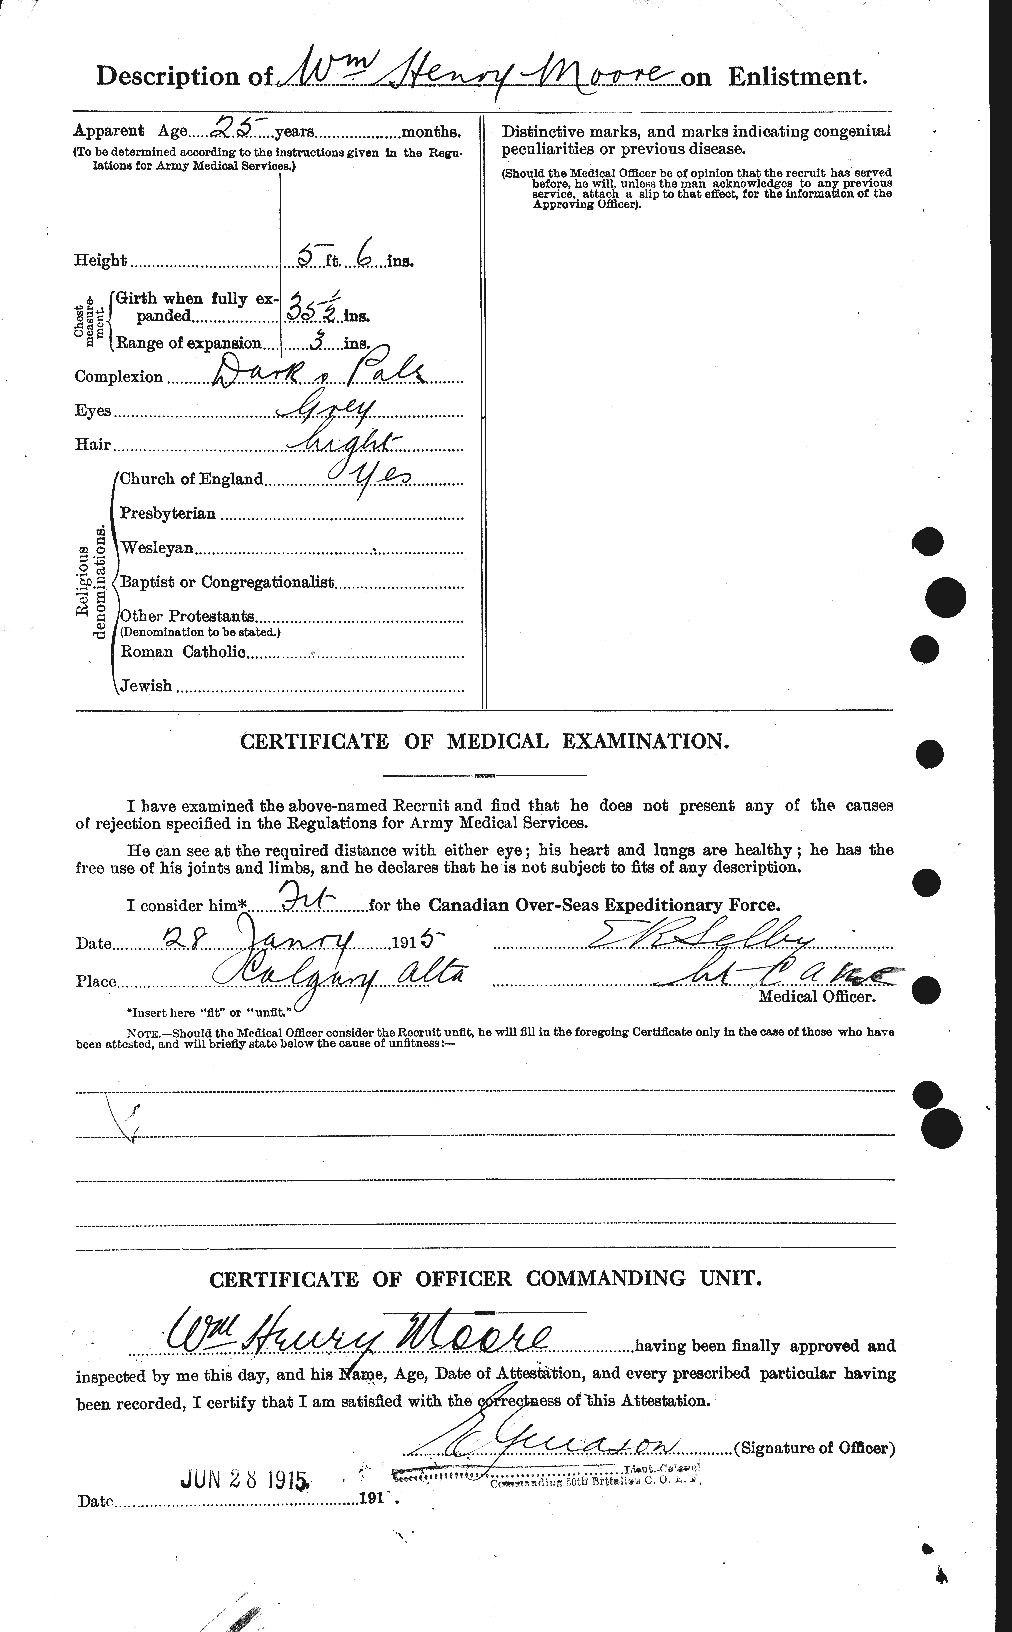 Personnel Records of the First World War - CEF 505822b